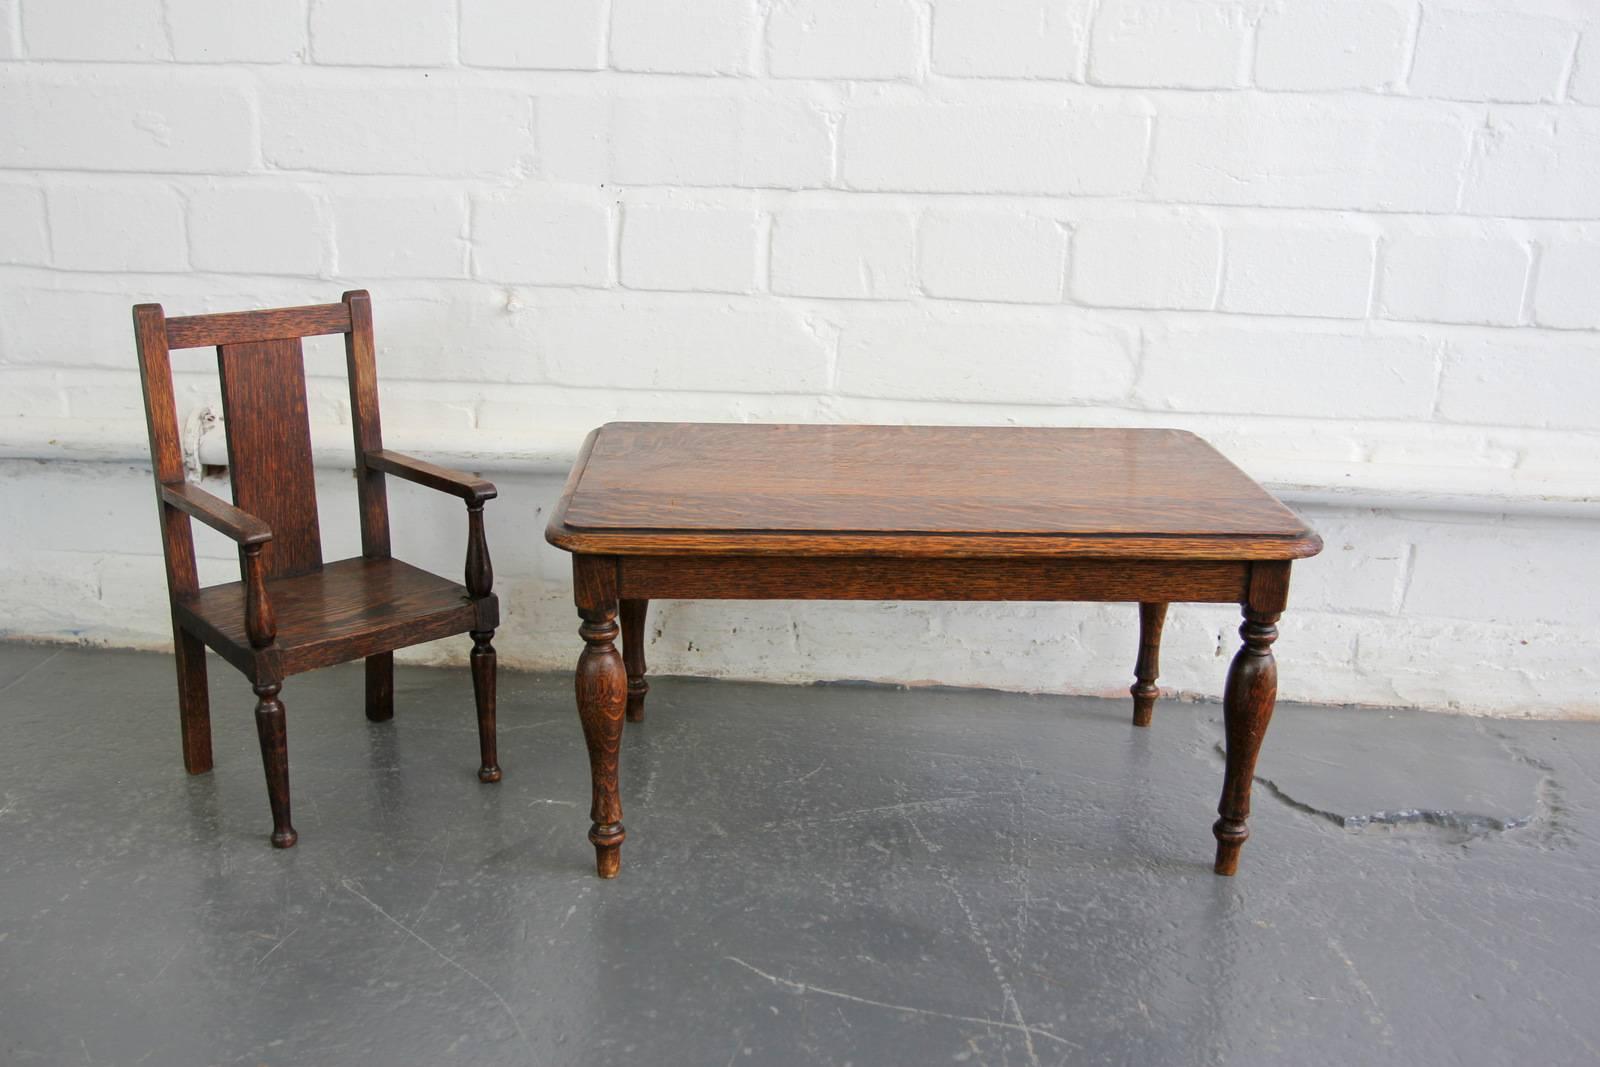 Early 20th century apprentice made model table and chair

- Made from solid mahogany
- Hand-turned legs on the chair and table
- Would have been made by a carpenters apprentice 
- English, circa 1910
- Chair measures 18cm wide x 16cm deep x